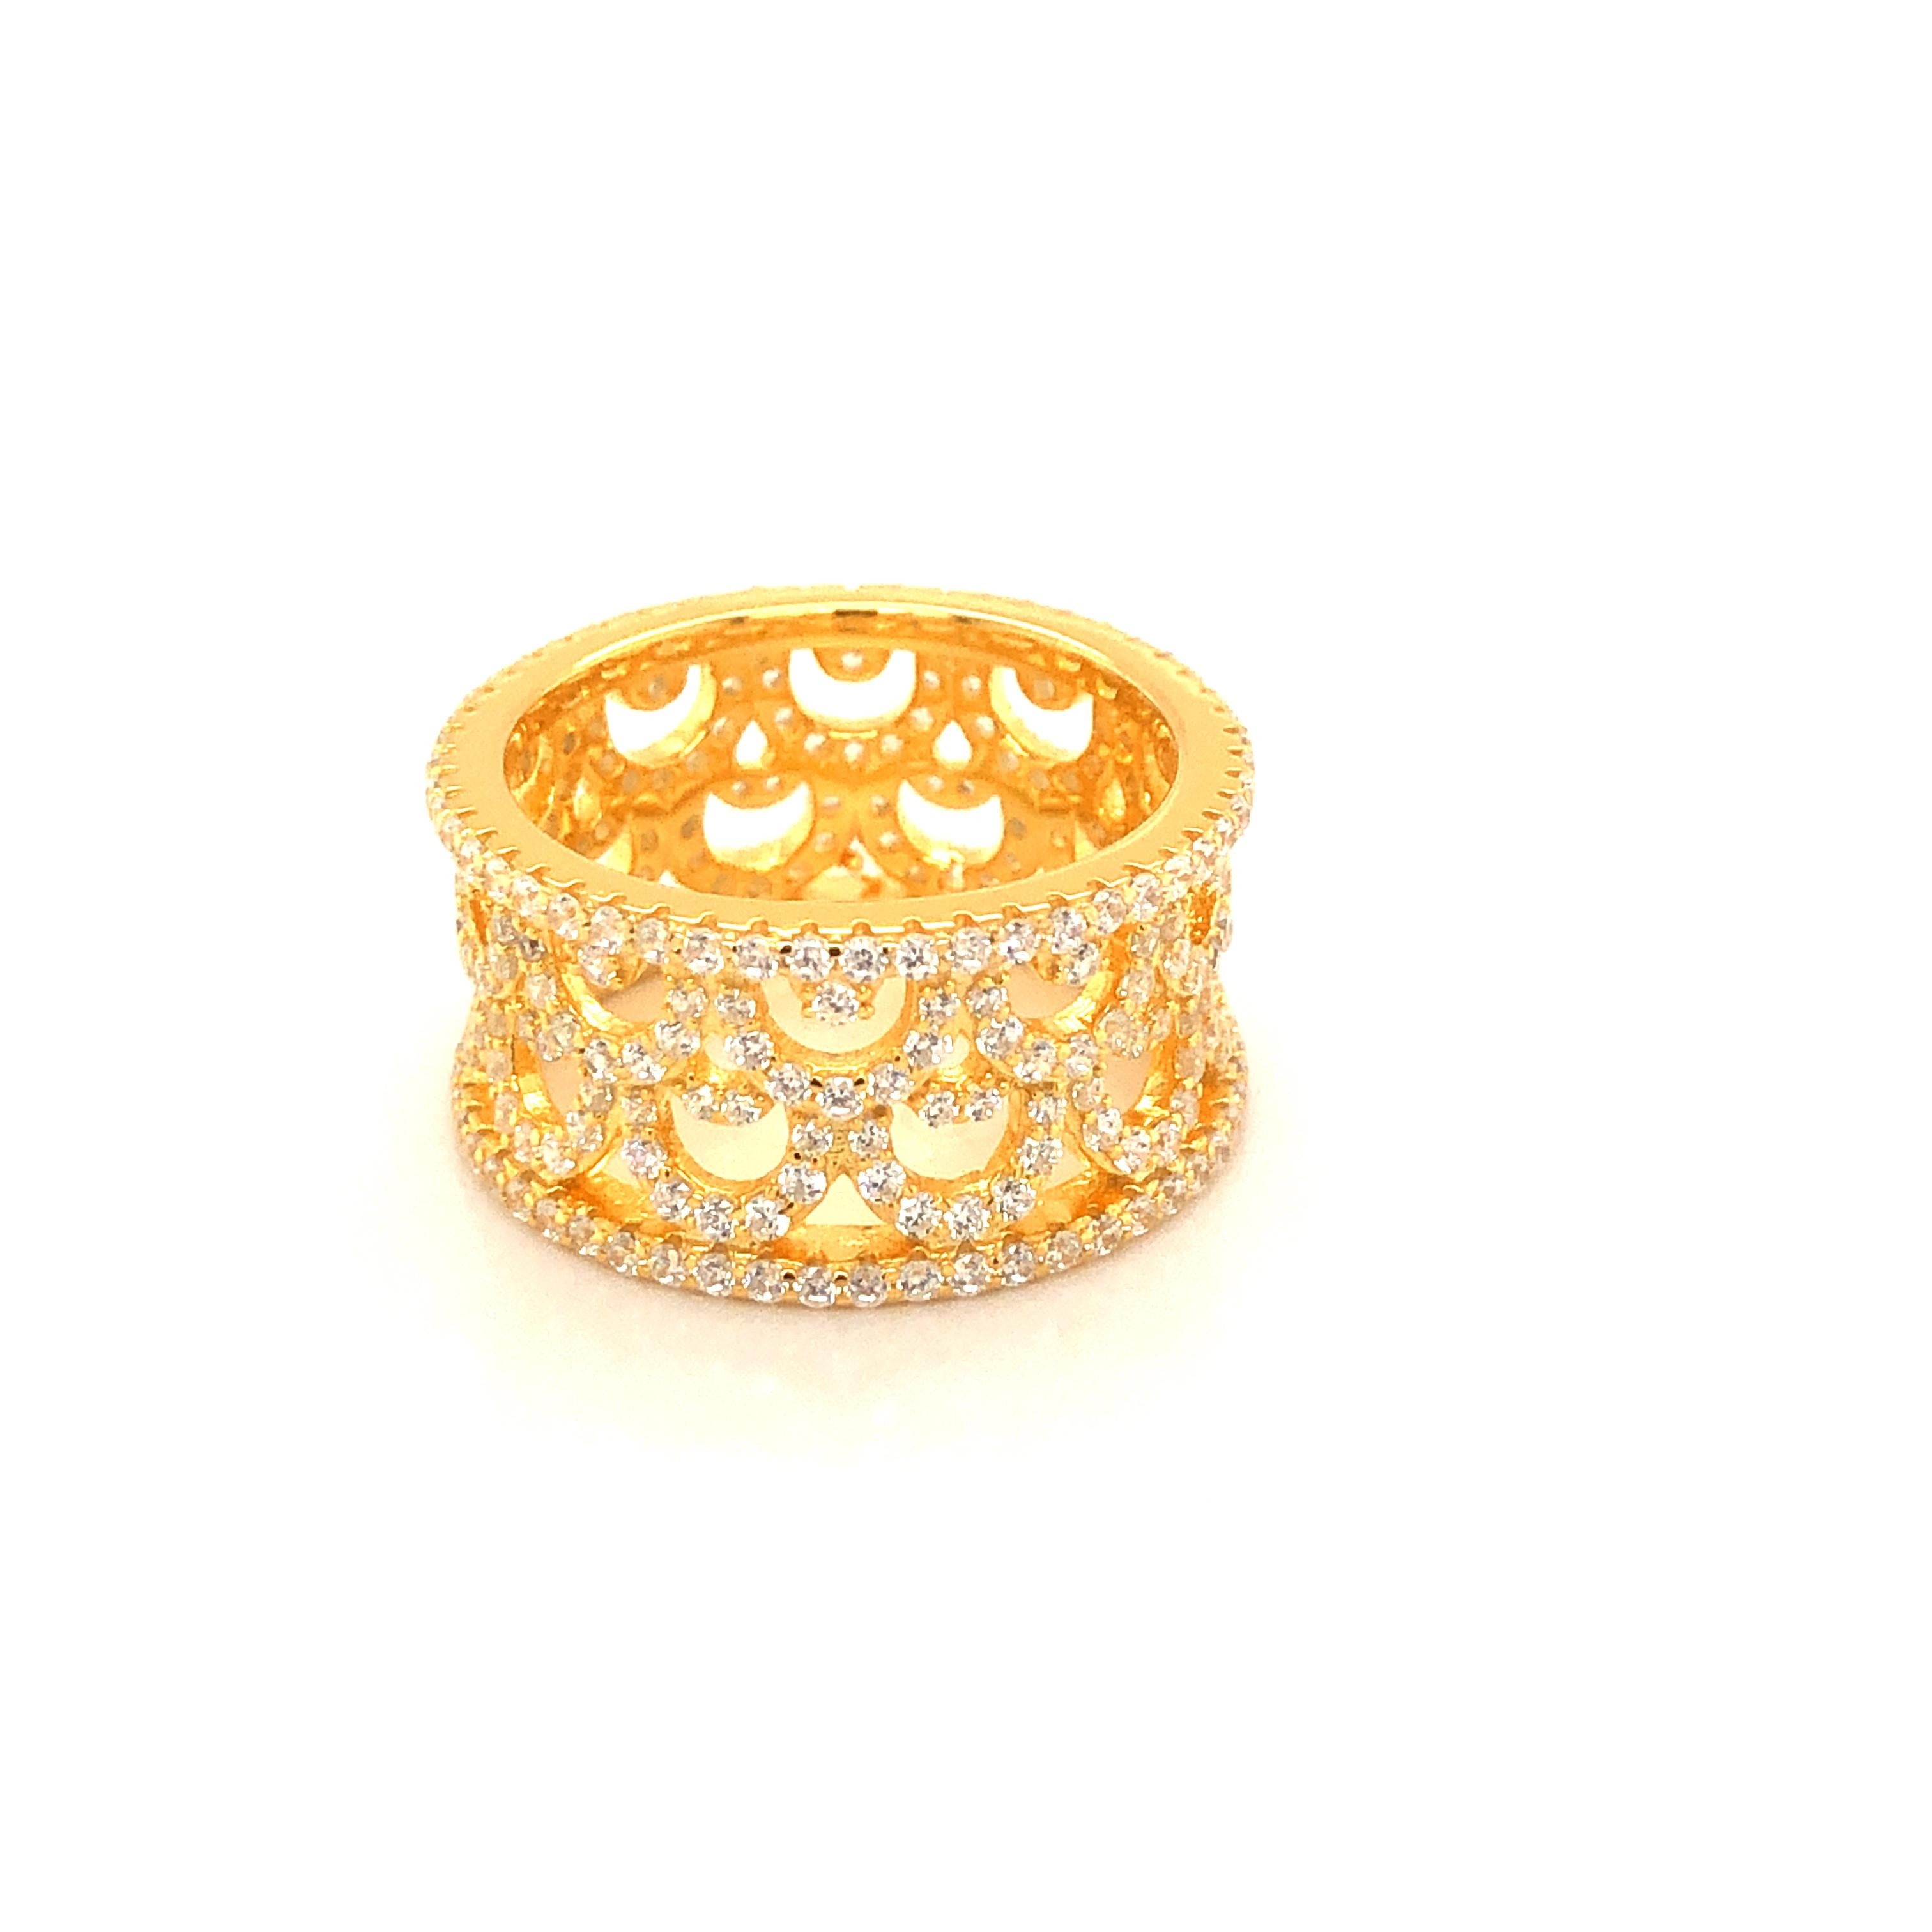 This intricately detailed women's wide eternity band features 3.40ct of round brilliant cut cubic zirconia.
The fashionably wide vintage design is set in 925 sterling silver and finished in either 14kt yellow gold, 14kt rose gold or high gloss white